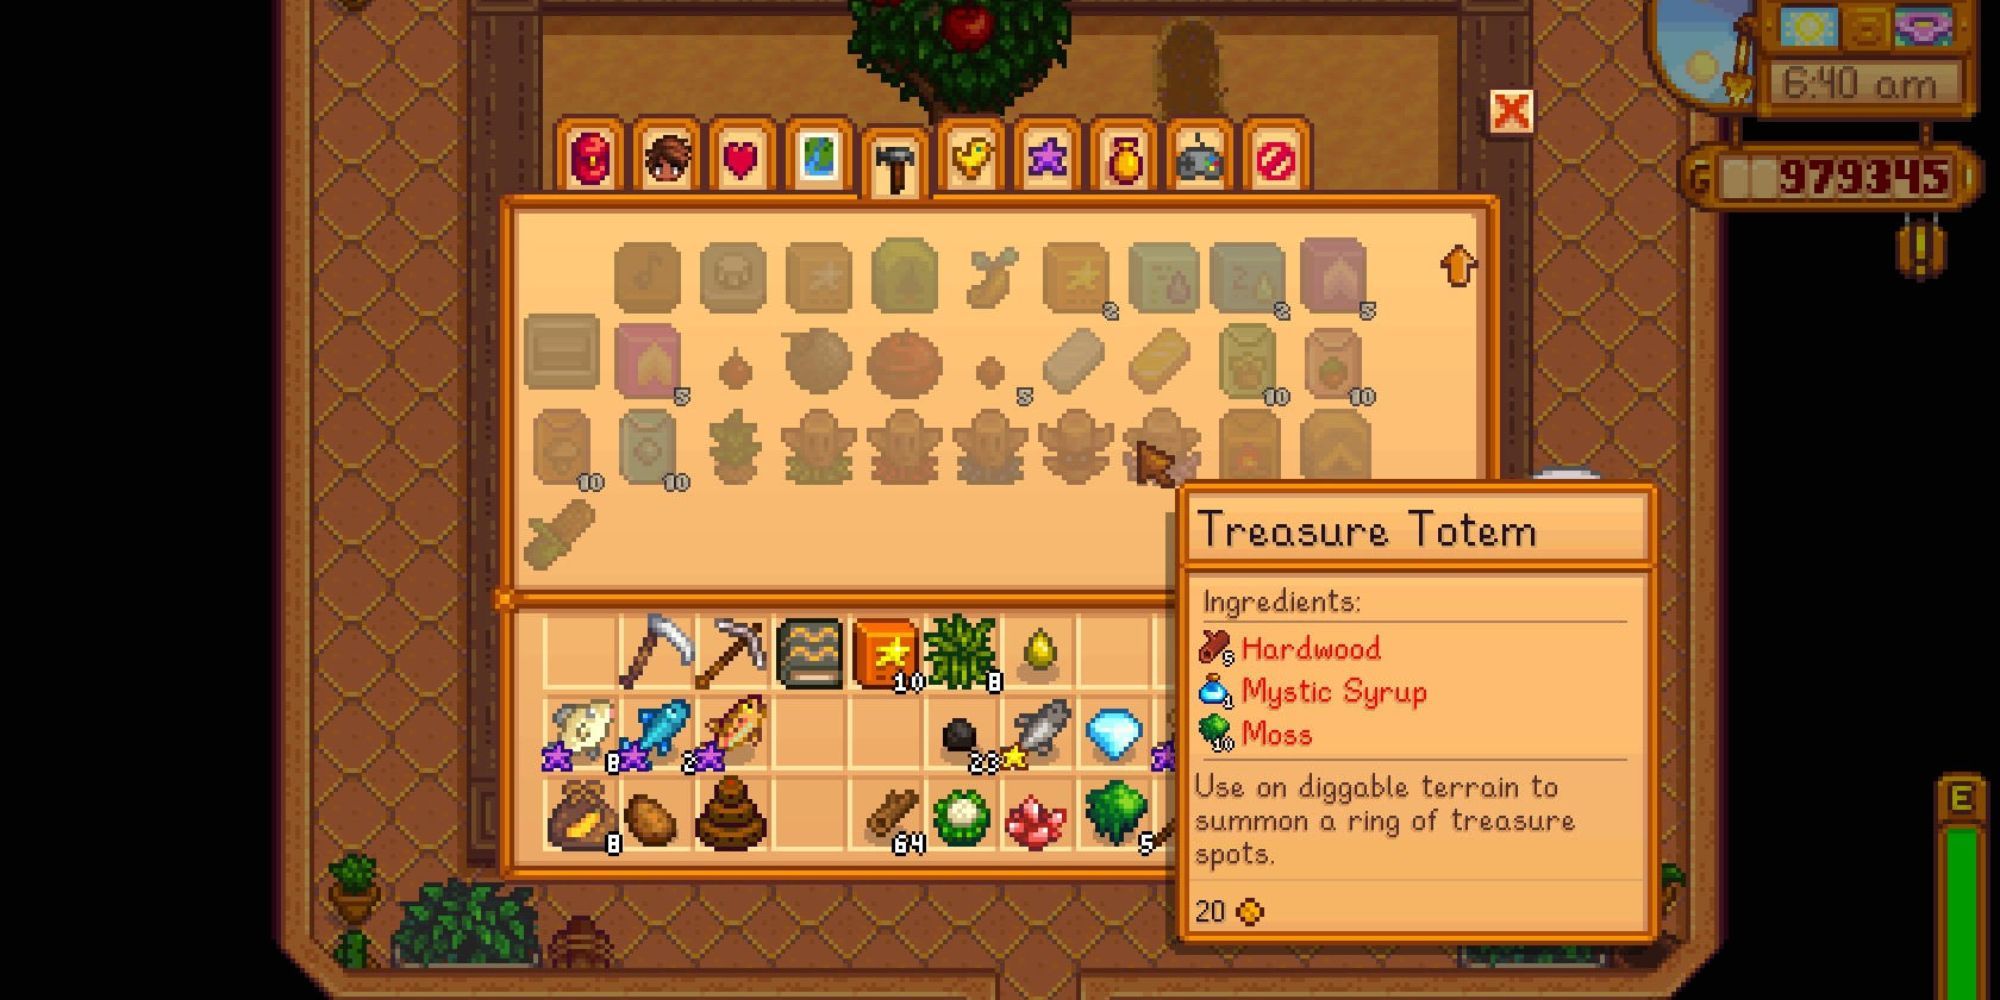 treasure totem recipe popped up on crafting menu in stardew valley.